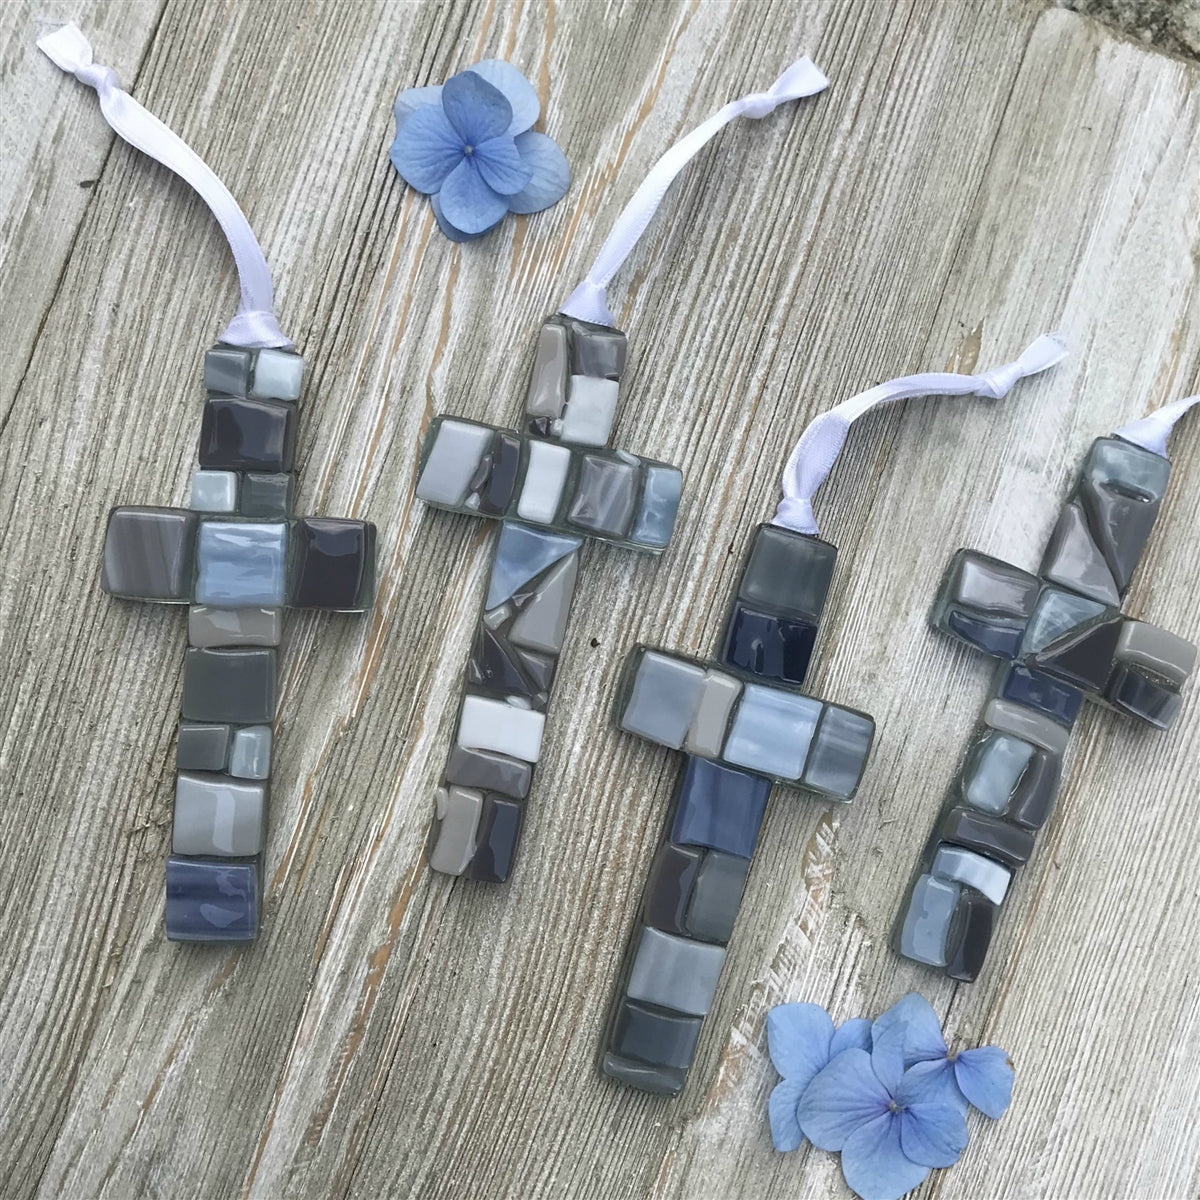 An assortment of gray mosaic crosses, each cross is unique.